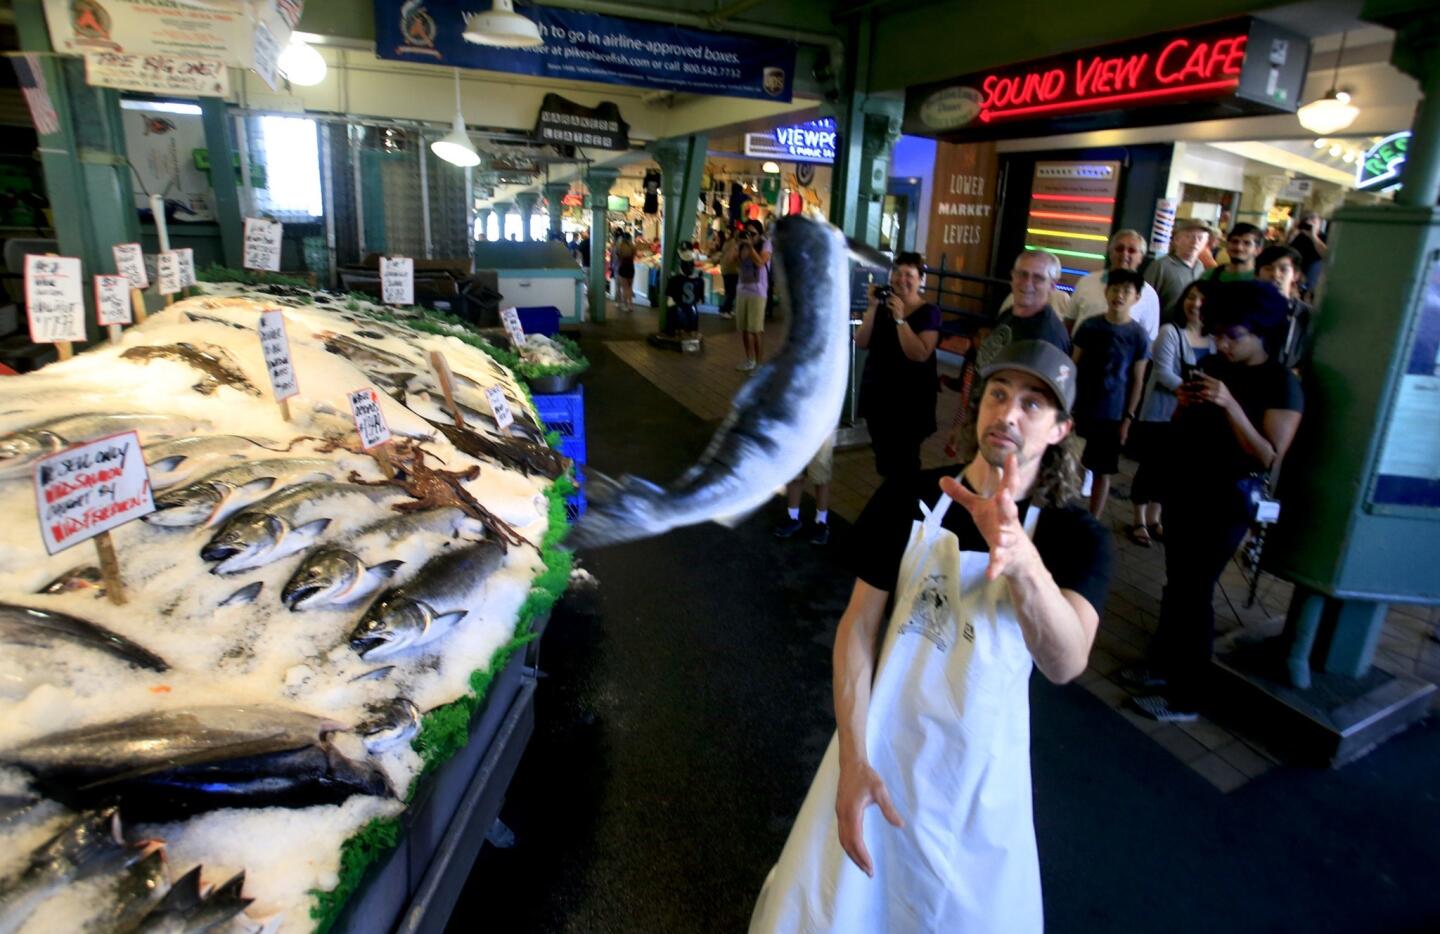 The Pike Place Fish Market